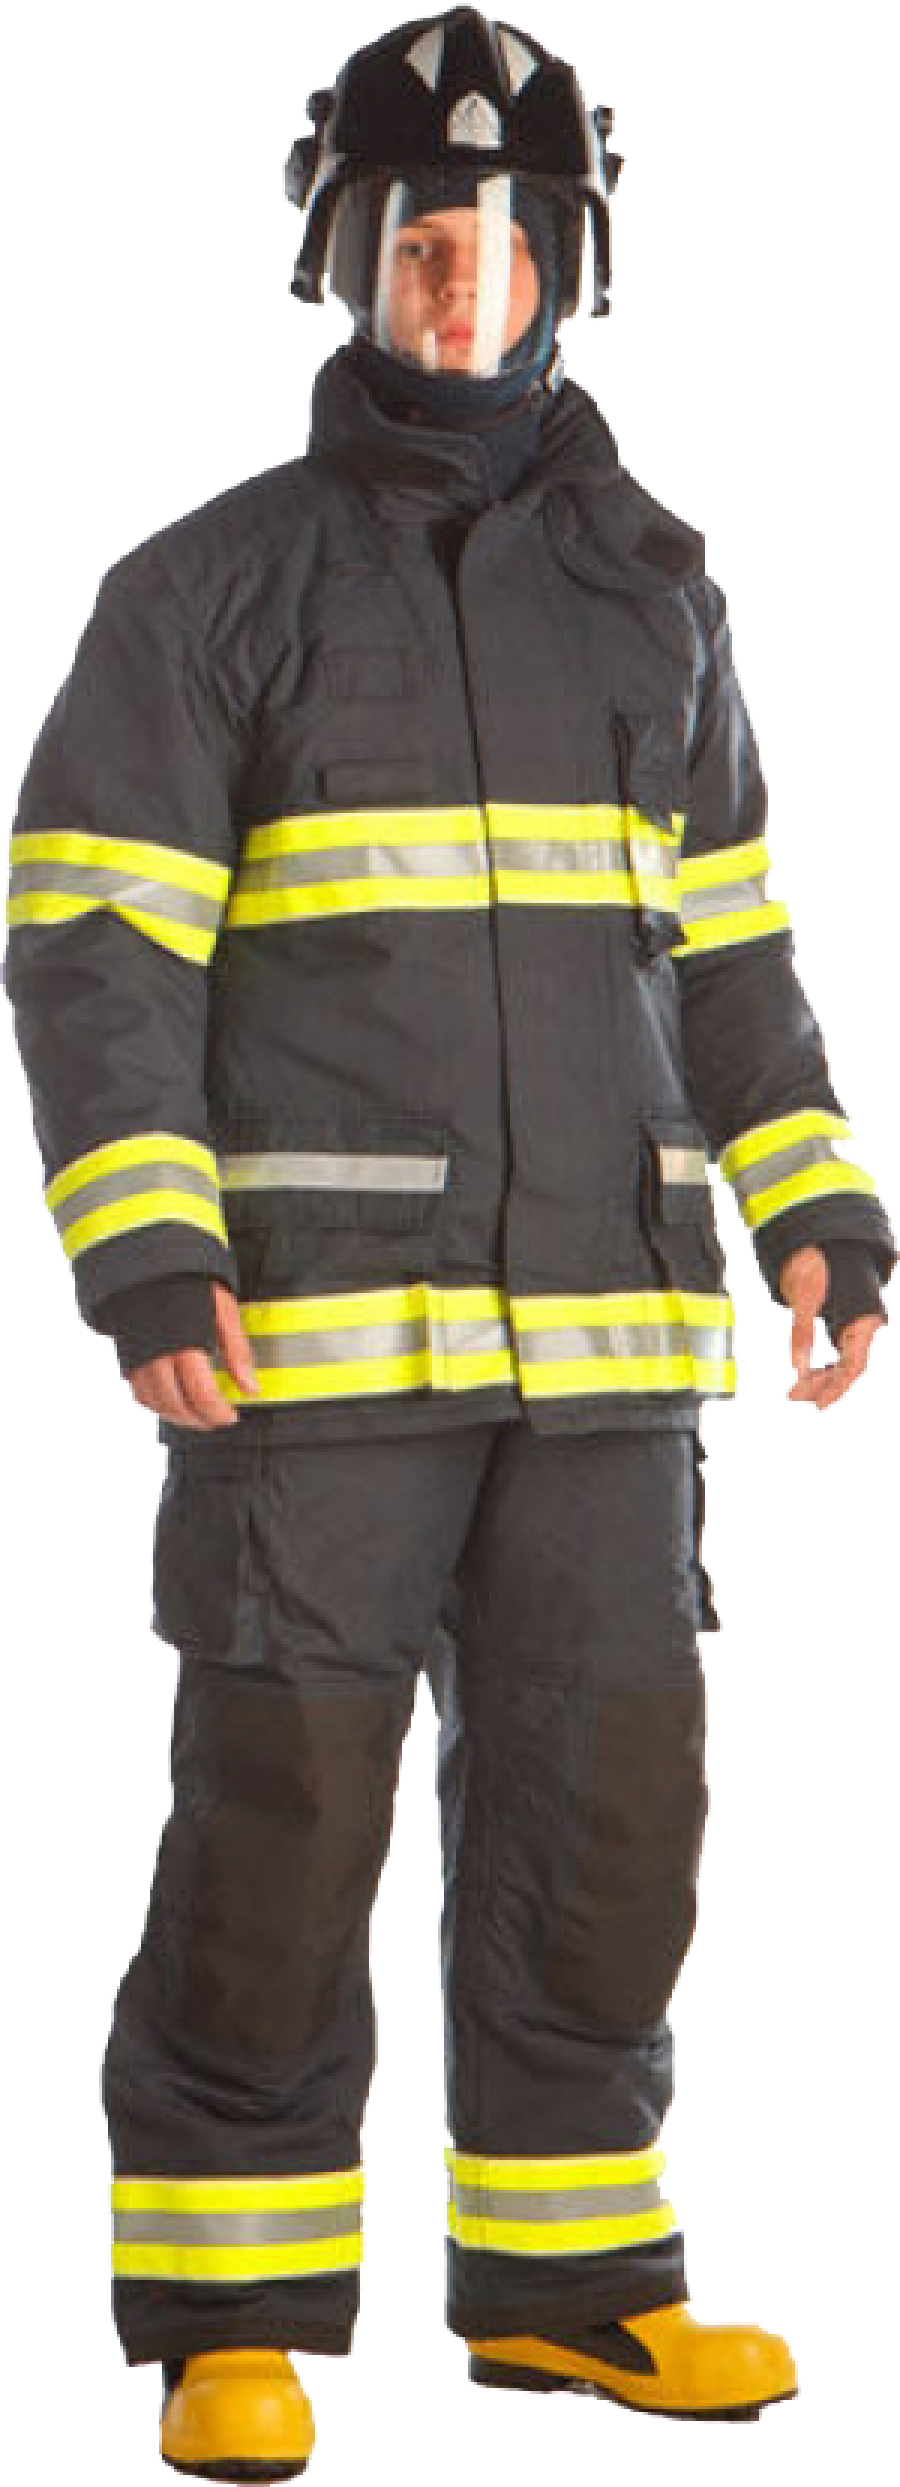 Firefighter PNG Photos